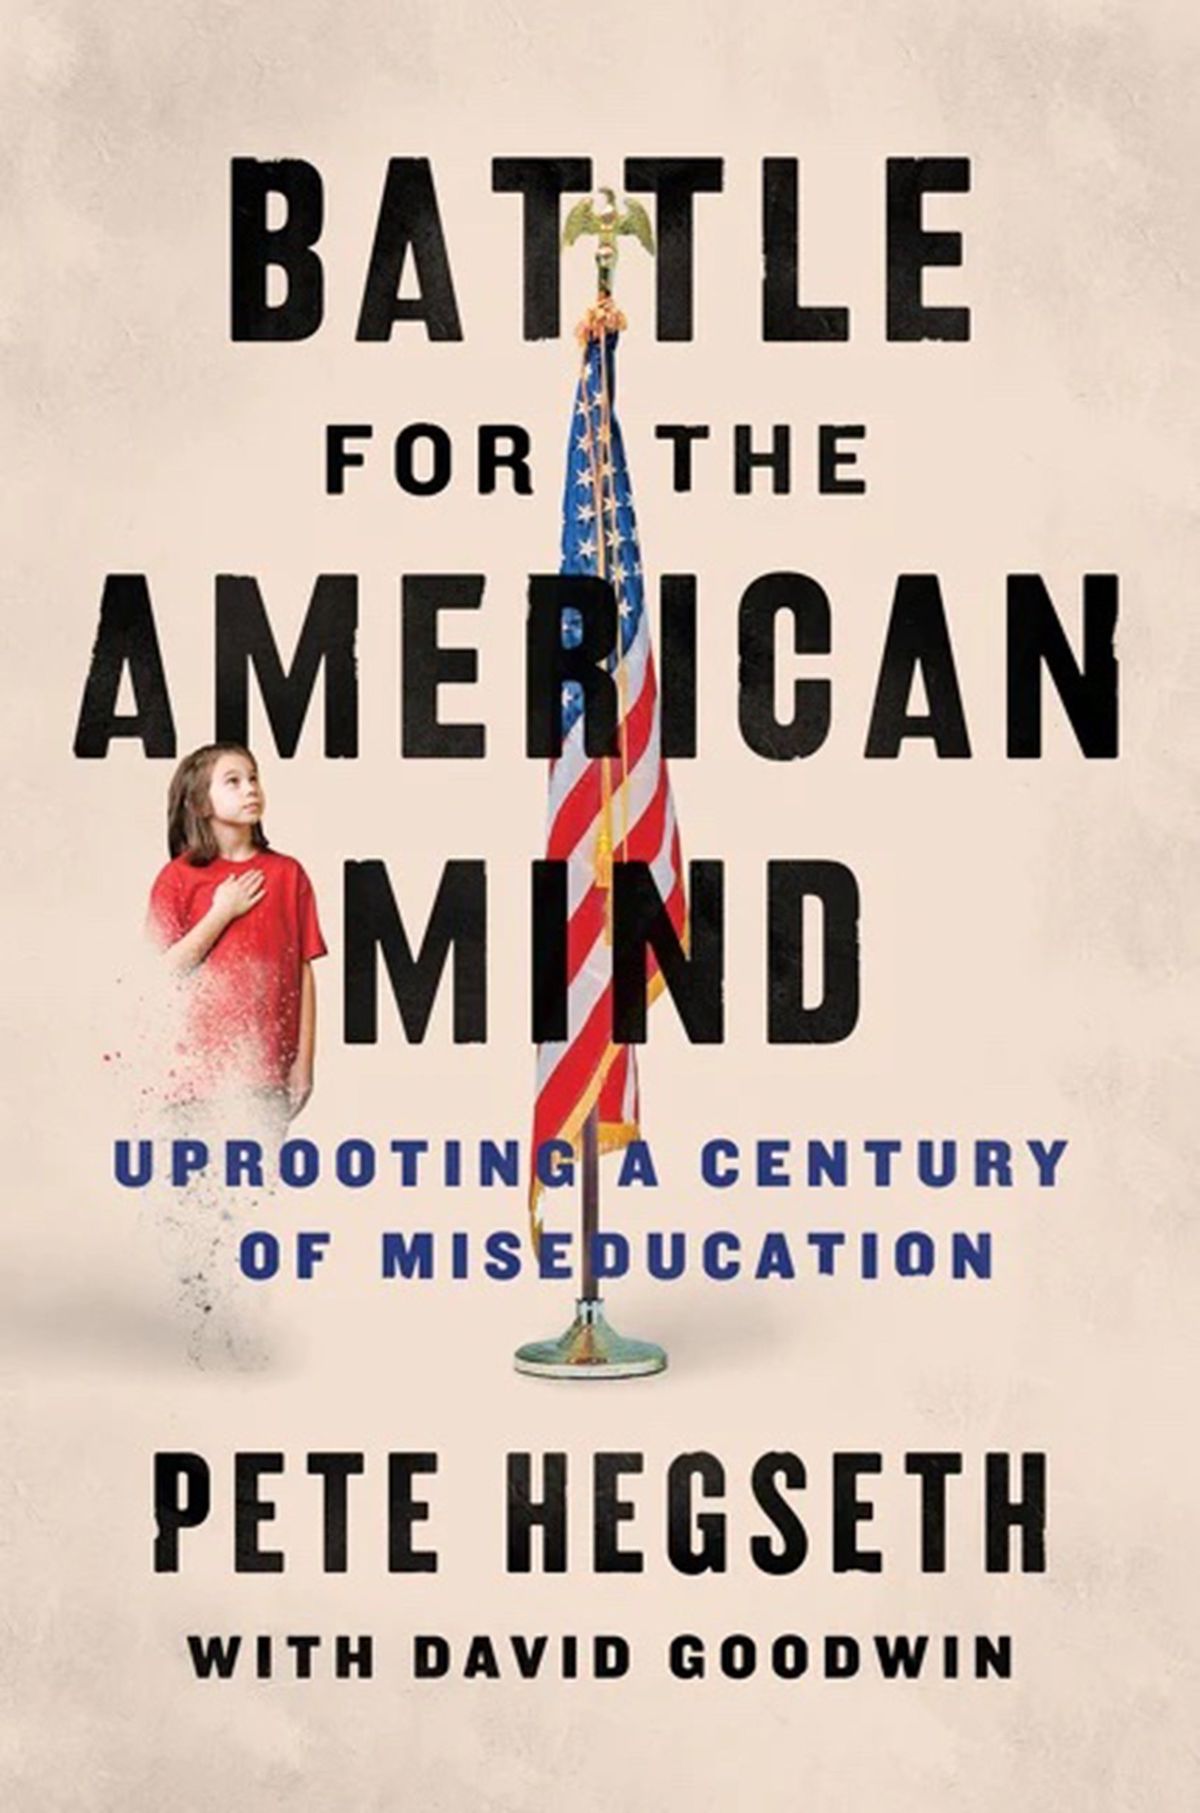 "Battle for the American Mind: Uprooting a Century of Miseducation" by Pete Hegseth. (HarperCollins Publishers/TNS)  (HarperCollins Publishers/TNS/TNS)